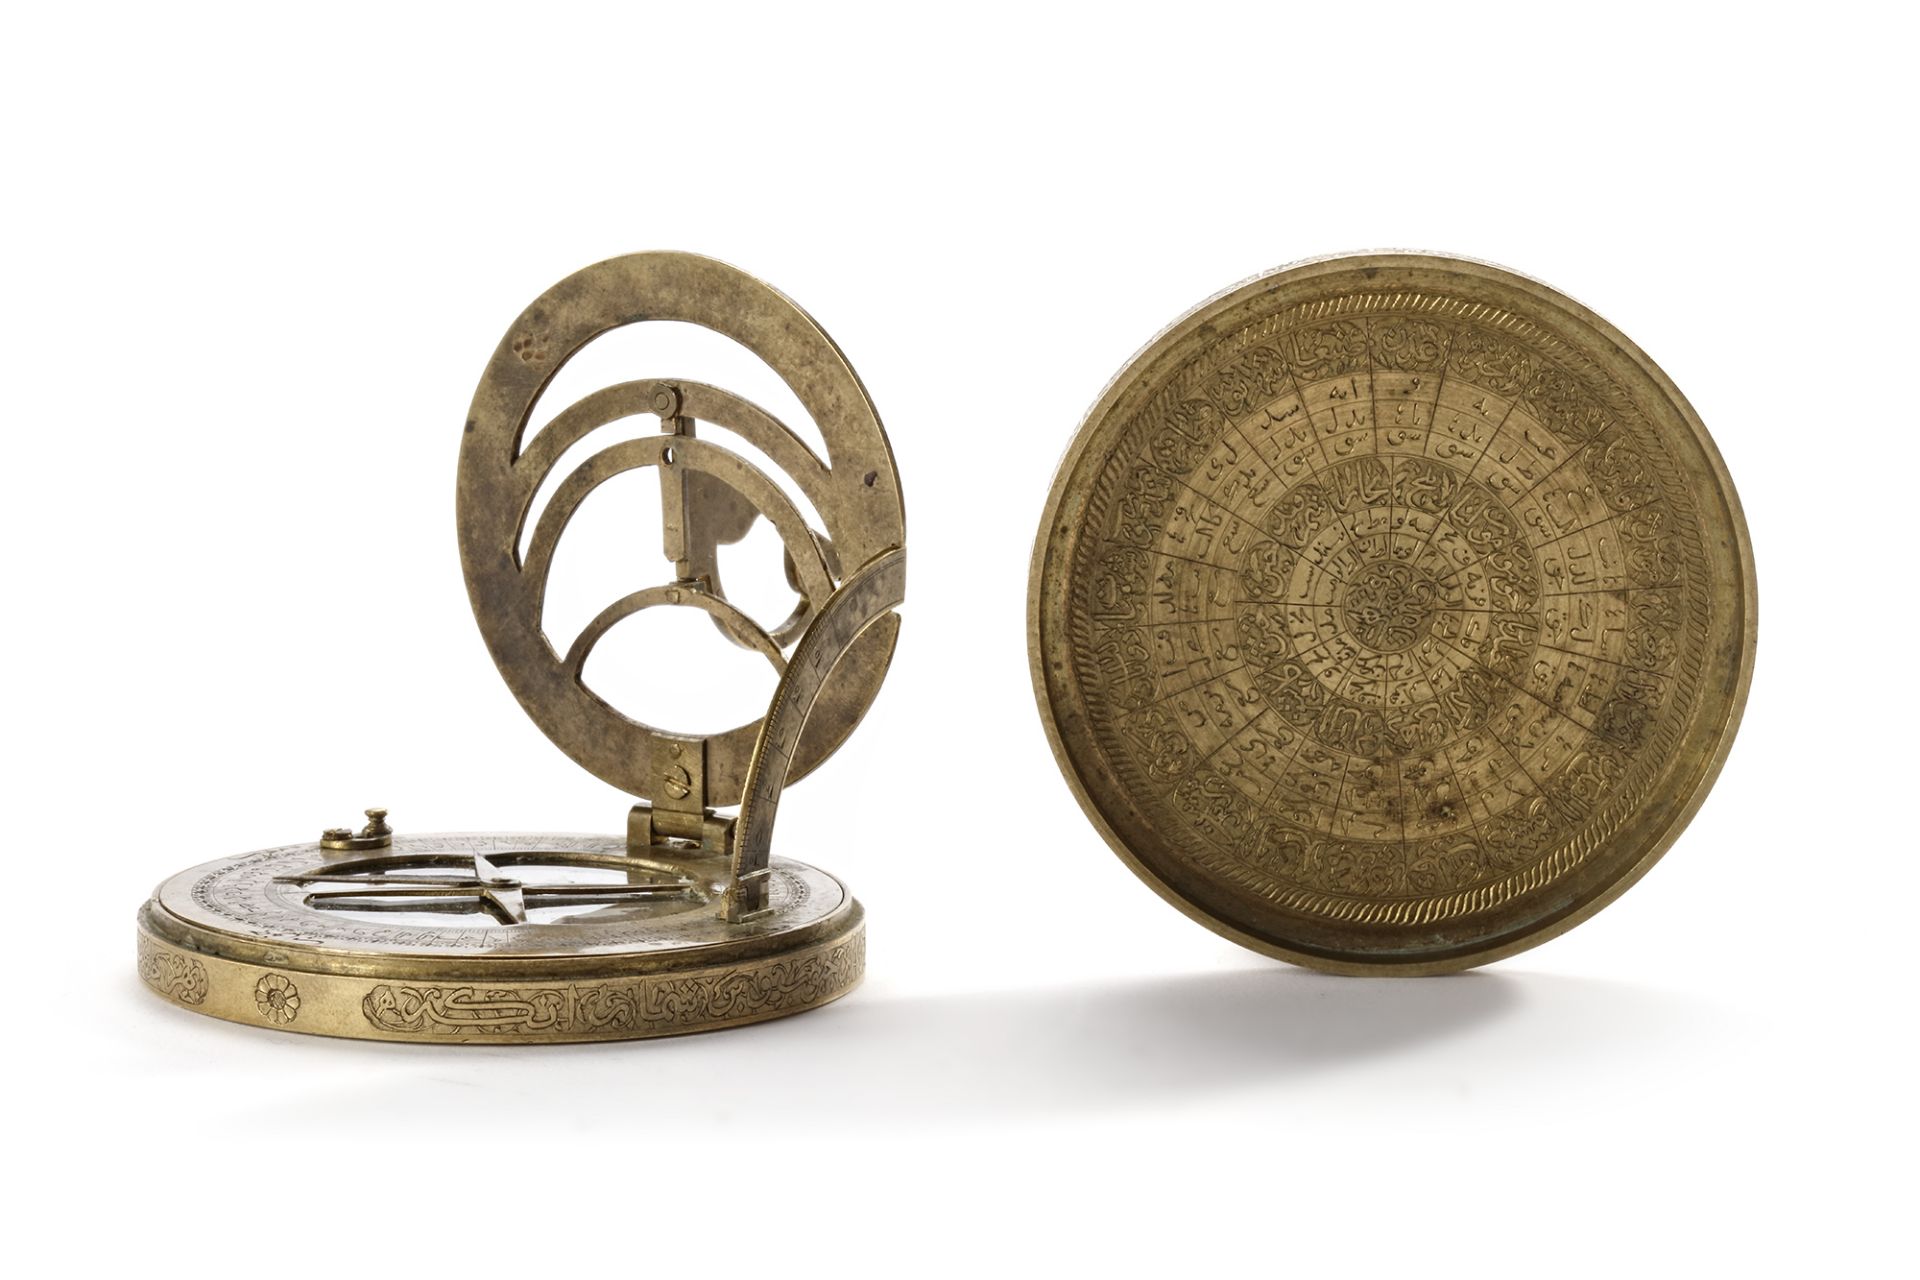 A RARE PERSIAN QIBLA FINDER FITTED WITH A EUROPEAN STYLE "UNIVERSAL" SUNDIAL, 18TH CENTURY - Image 7 of 9